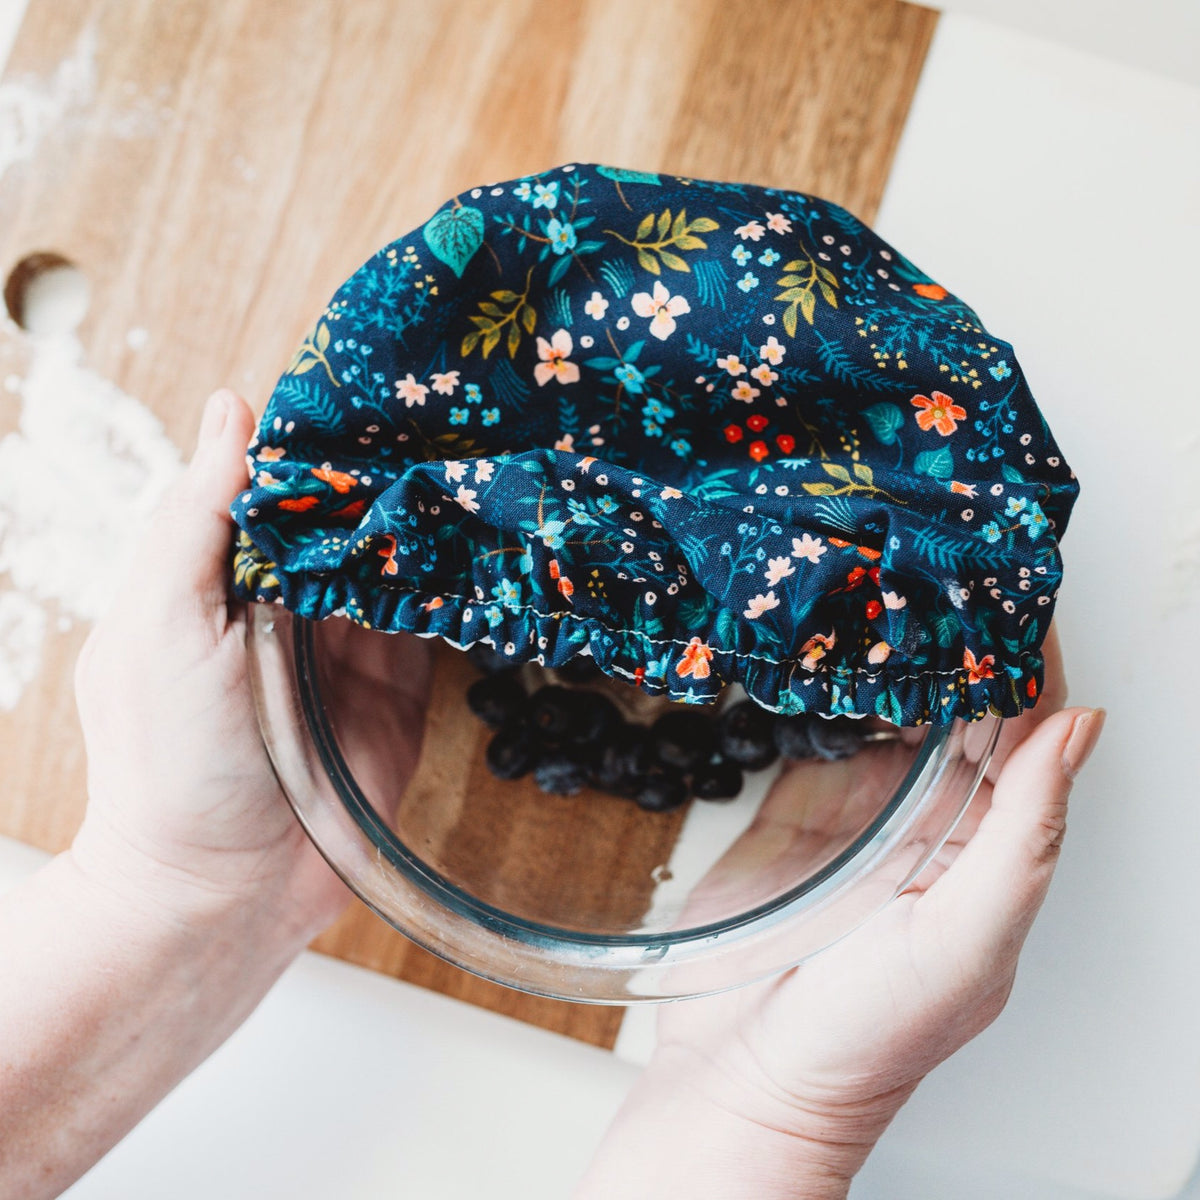 Reusable Dish Covers - Navy Floral